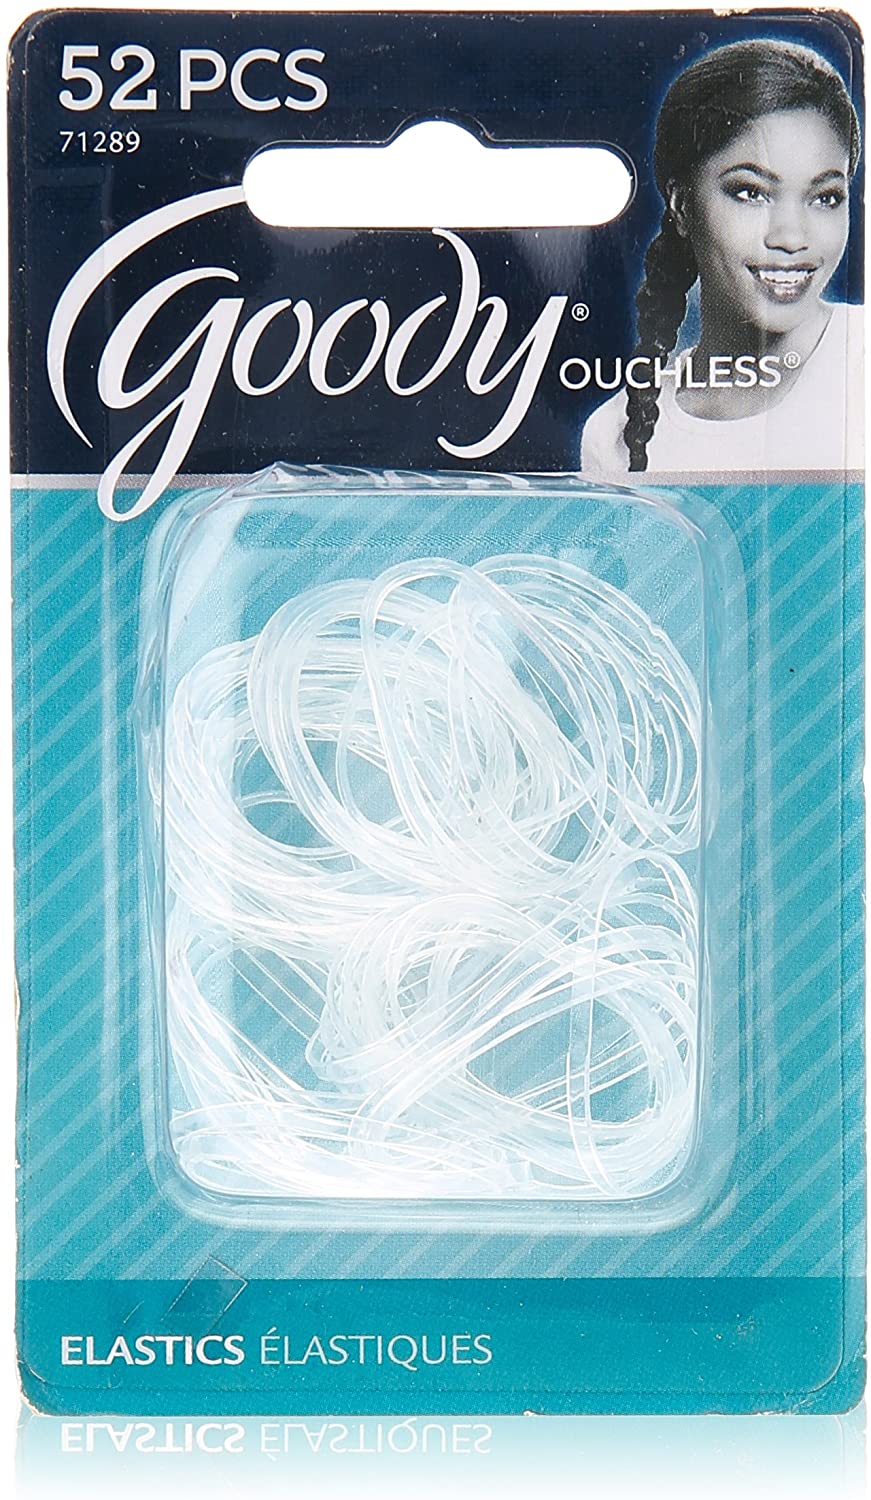 Goody Ouchless Elastic Band - 52 piece